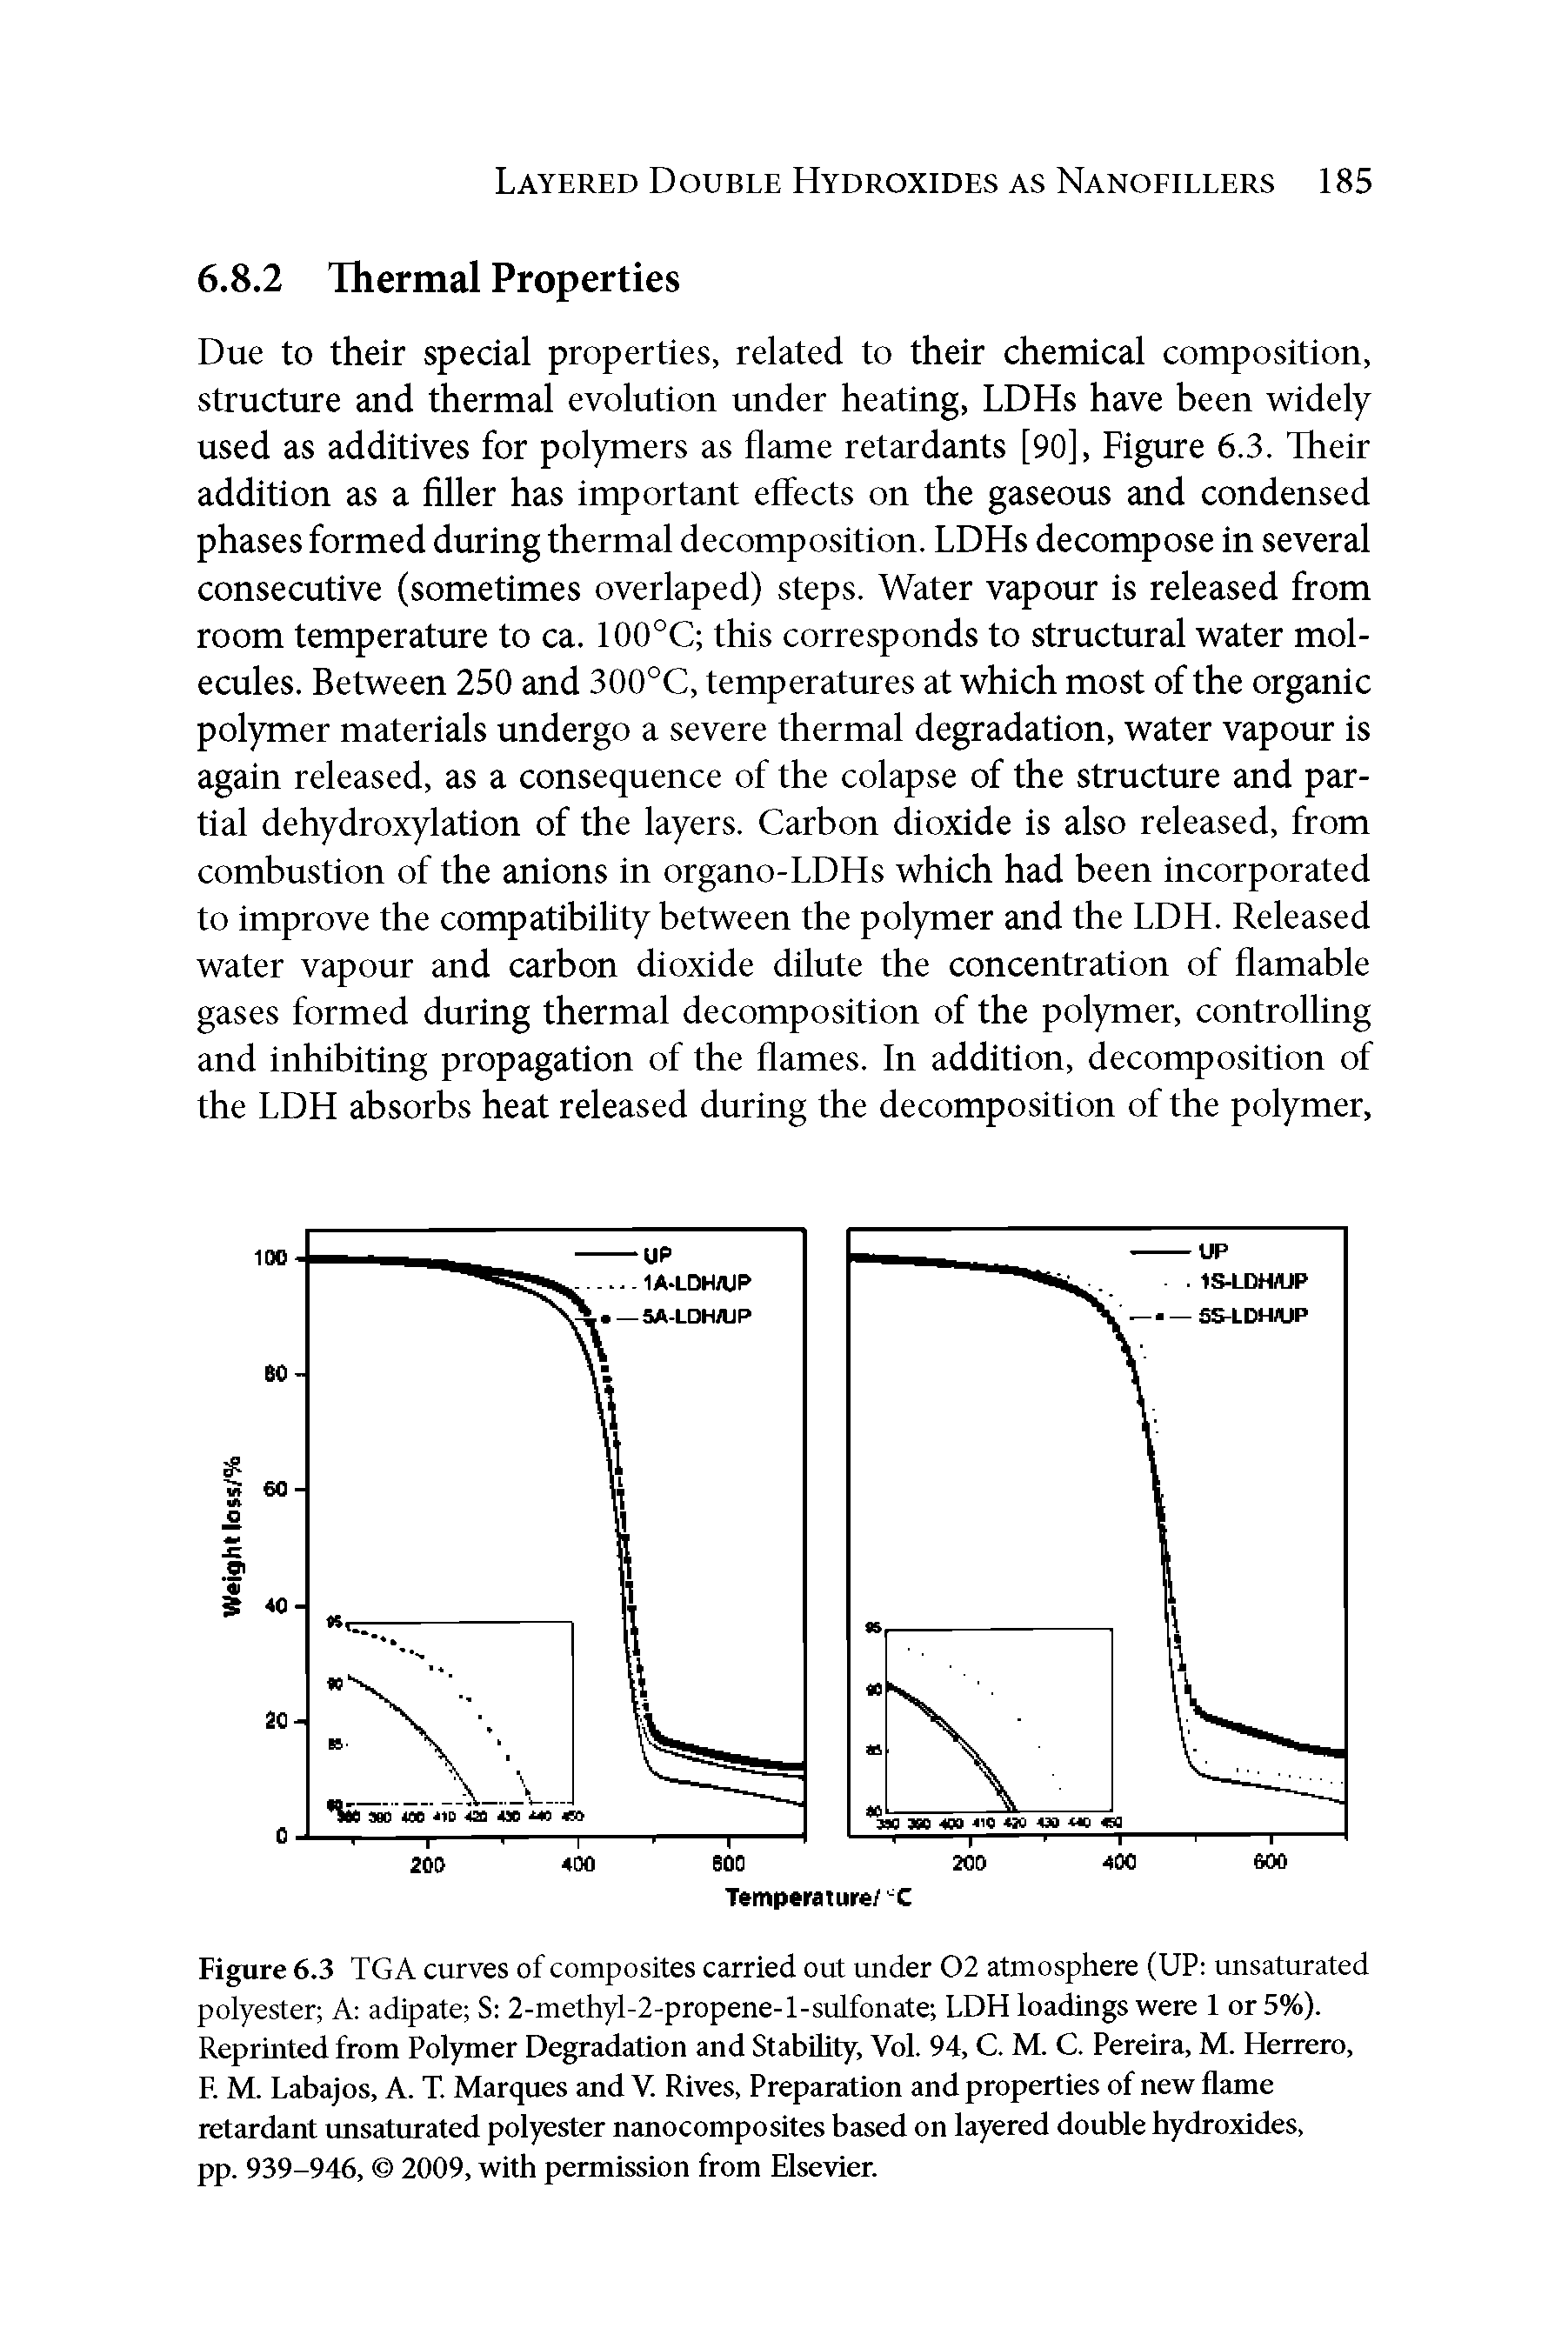 Figure 6.3 TGA curves of composites carried out under 02 atmosphere (UP unsaturated polyester A adipate S 2-methyl-2-propene-l-sulfonate LDH loadings were 1 or 5%). Reprinted from Polymer Degradation and Stability, Vol. 94, C. M. C. Pereira, M. Herrero, F. M. Labajos, A. T. Marques and V. Rives, Preparation and properties of new flame retardant unsaturated polyester nanocomposites based on layered double hydroxides, pp. 939-946, 2009, with permission from Elsevier.